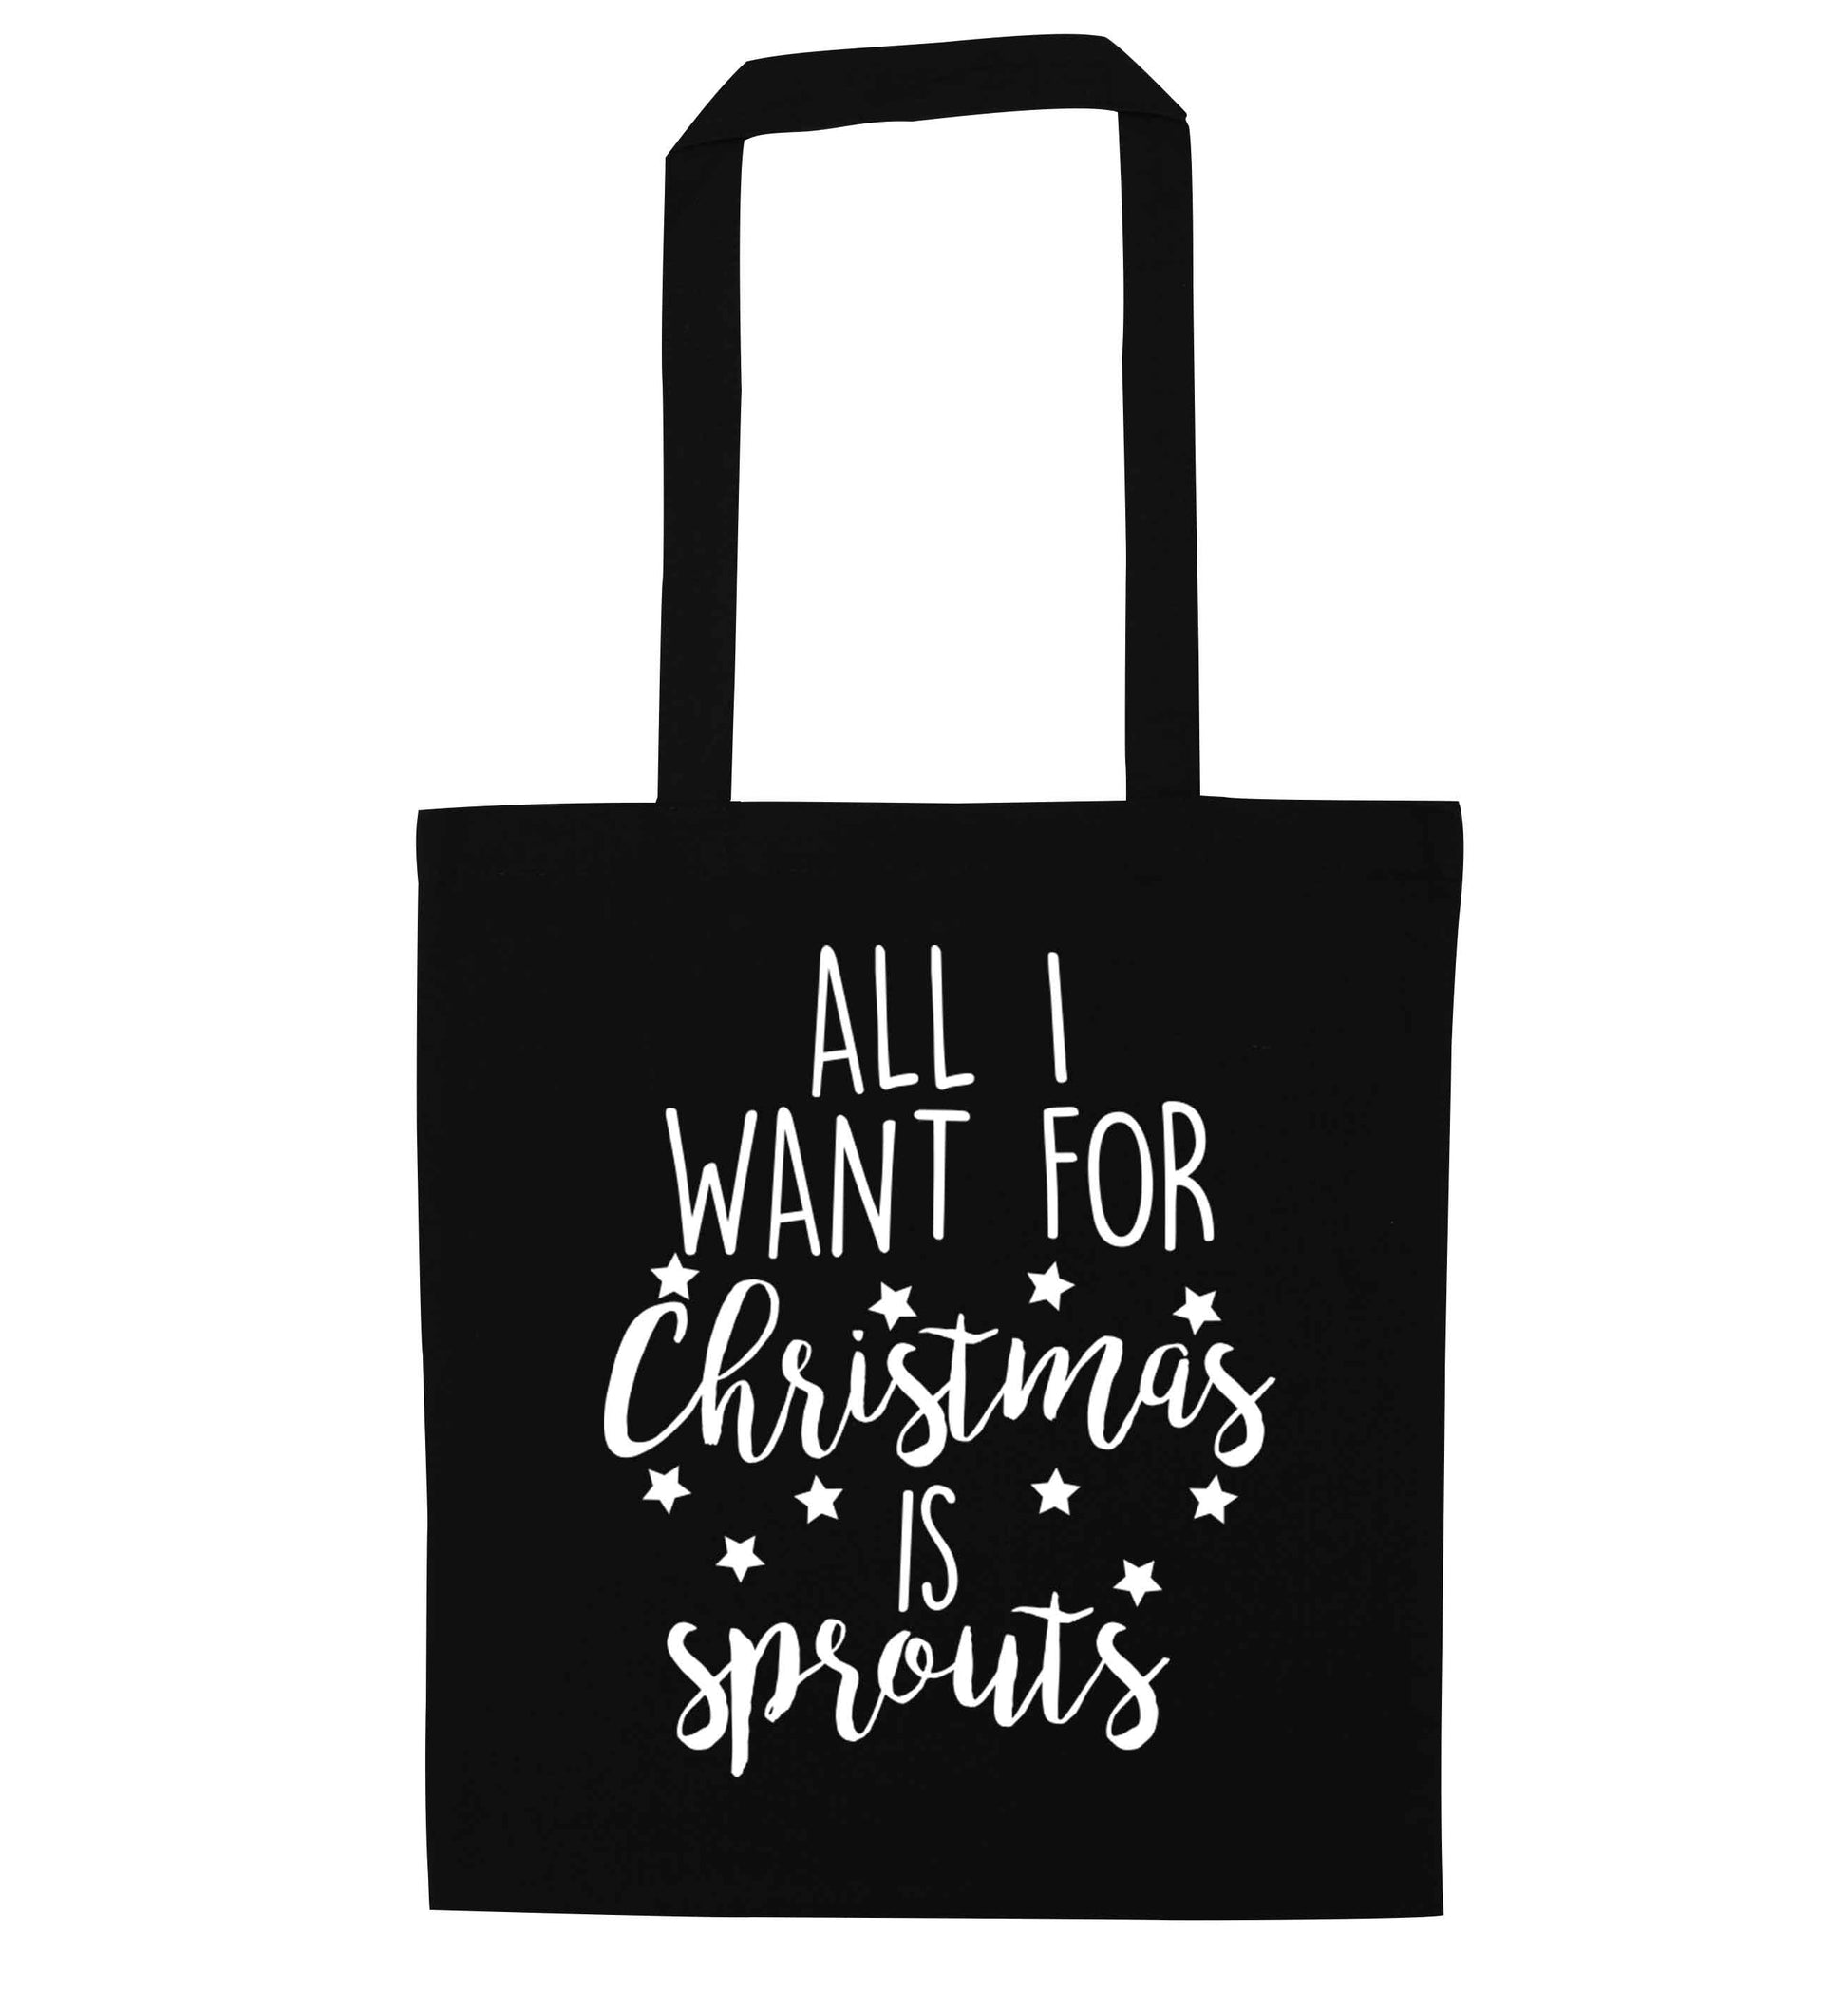 All I want for Christmas is sprouts black tote bag